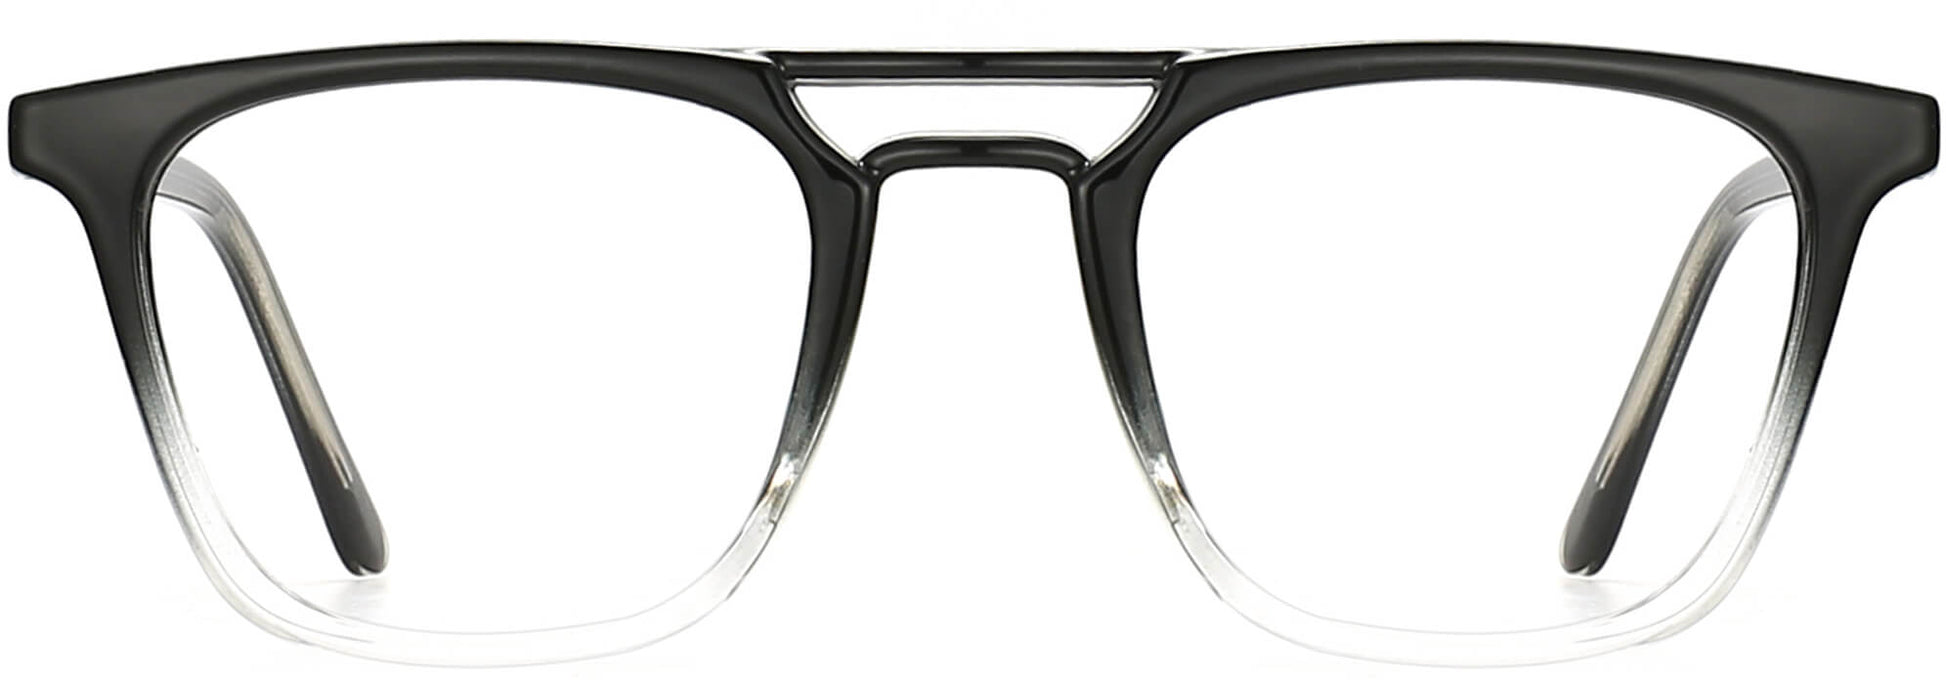 Tyson Square Black Eyeglasses from ANRRI, front view